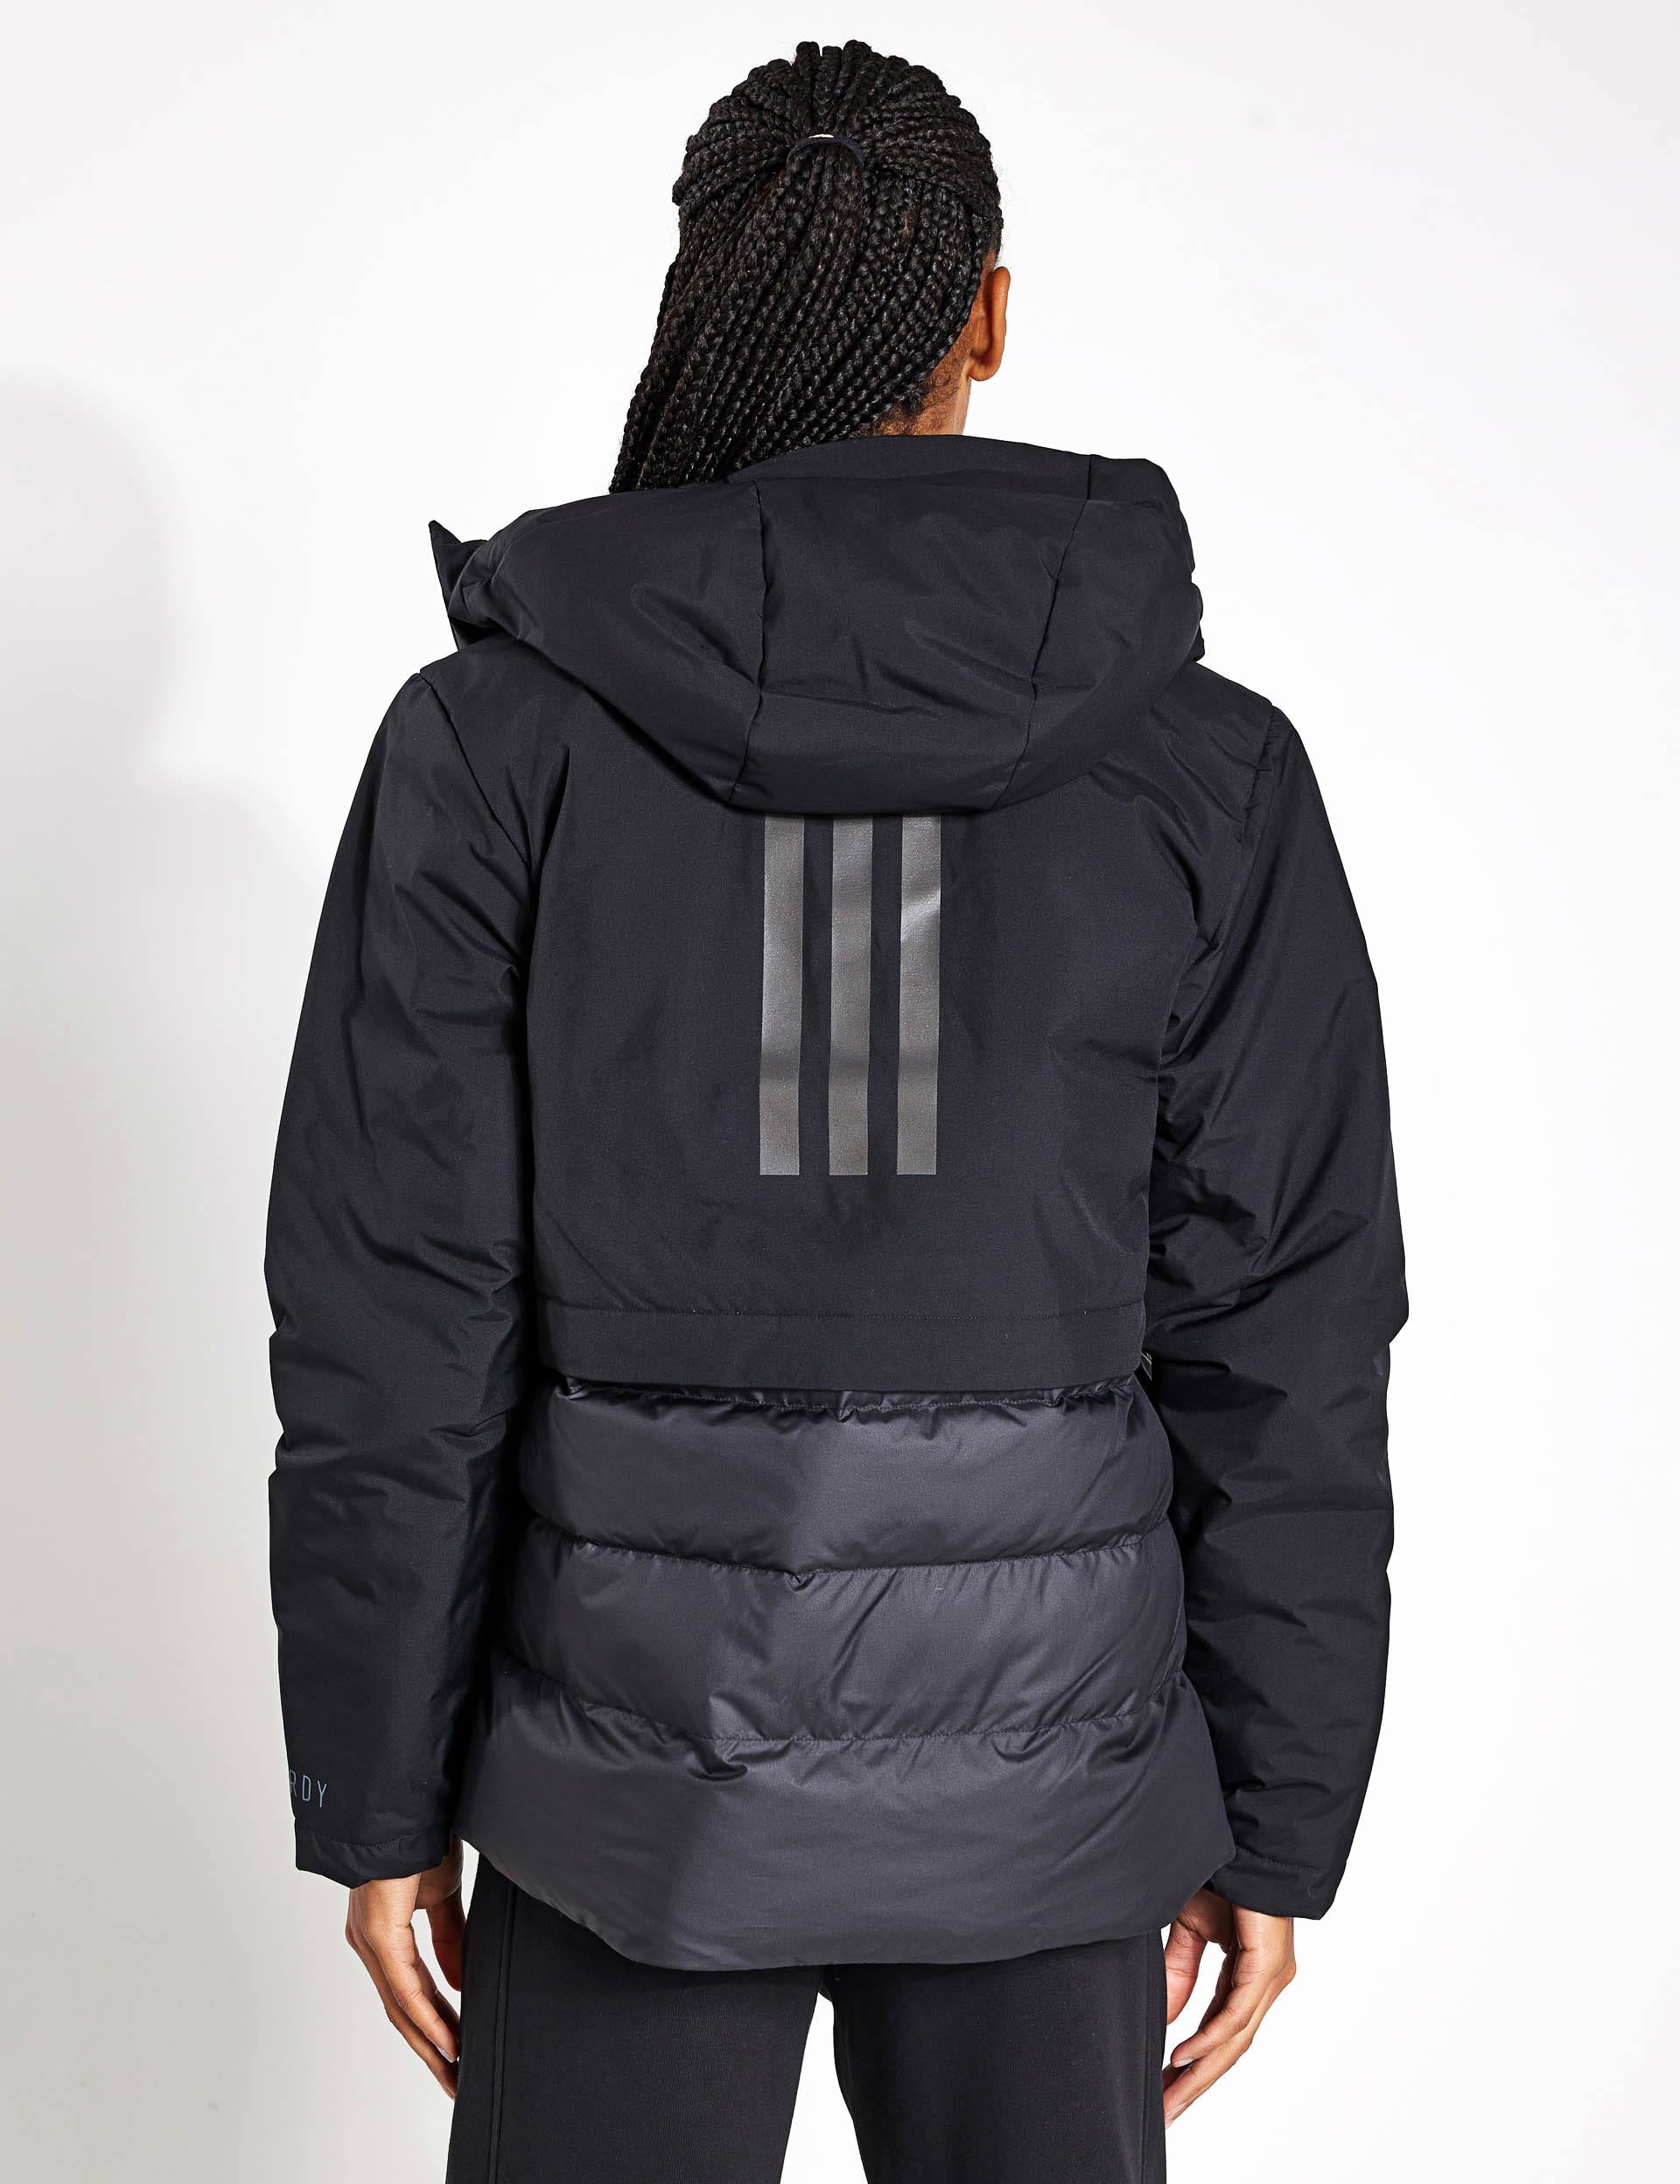 Sports Traveer The | COLD.RDY | Black adidas - Edit Jacket